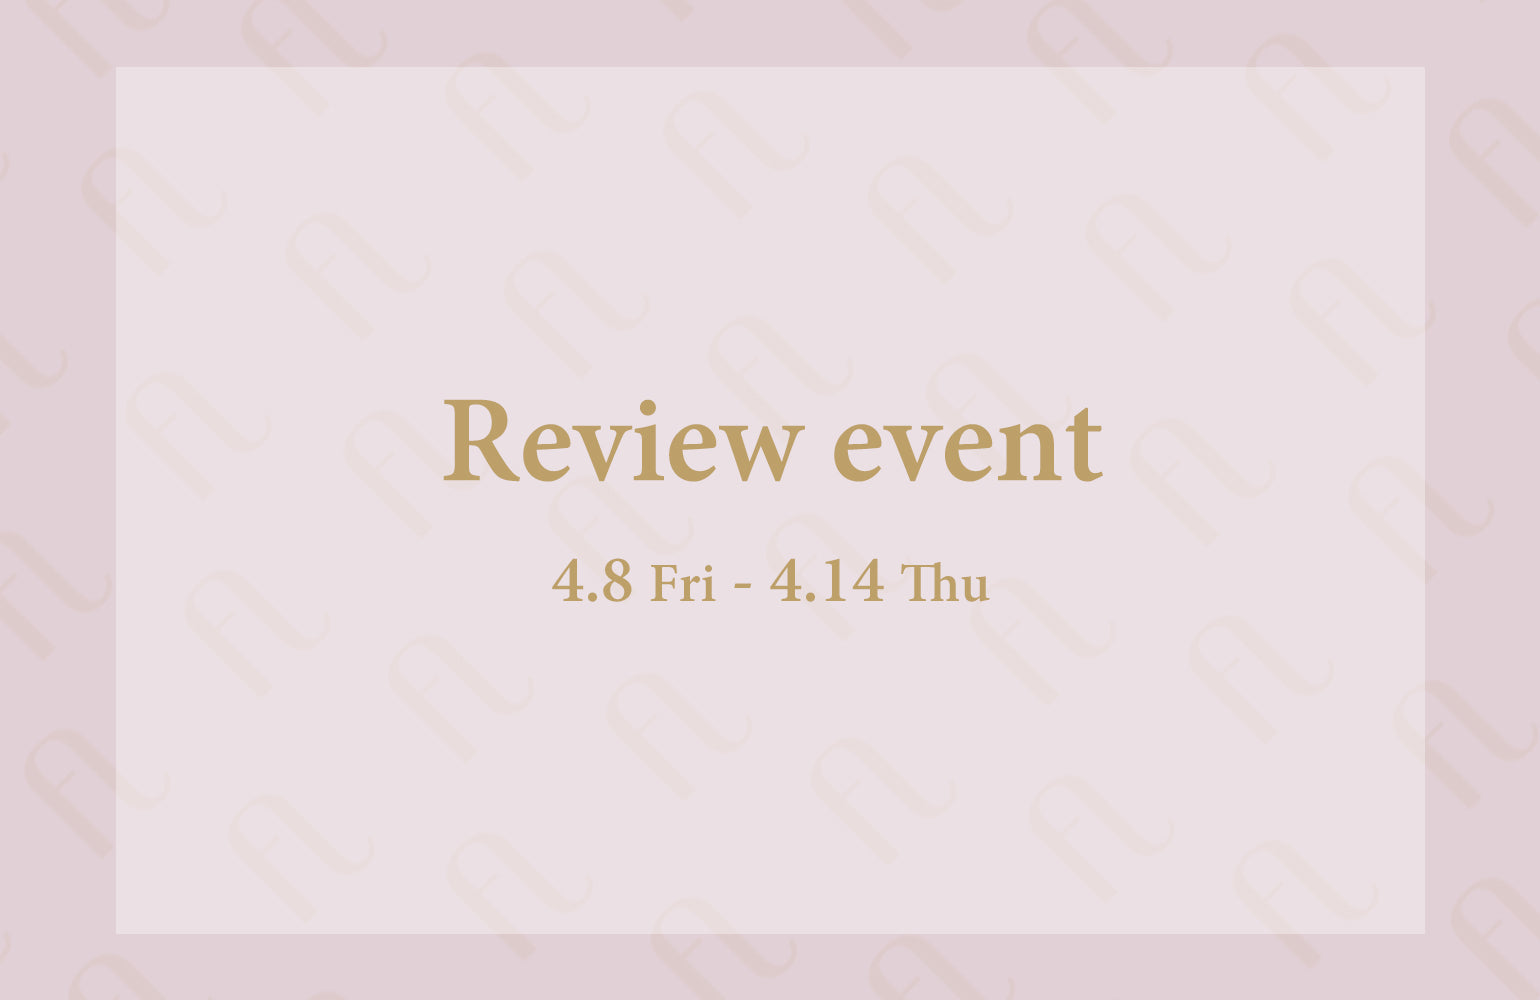 BEST REVIEW EVENT開催決定！